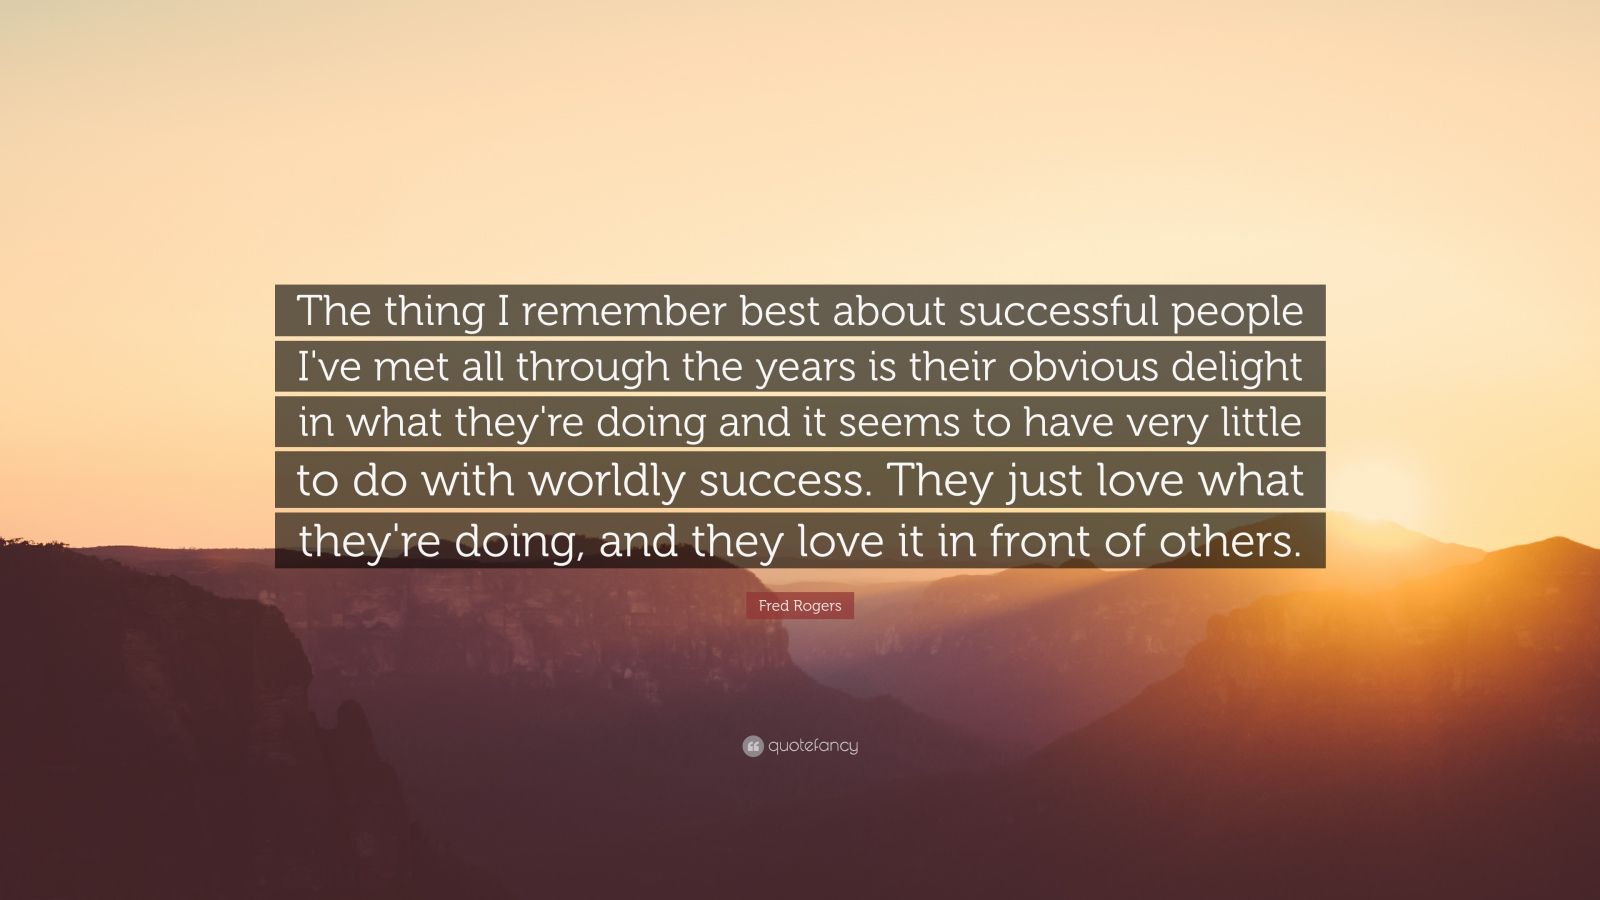 fred rogers quote: "the thing i remember best about successful